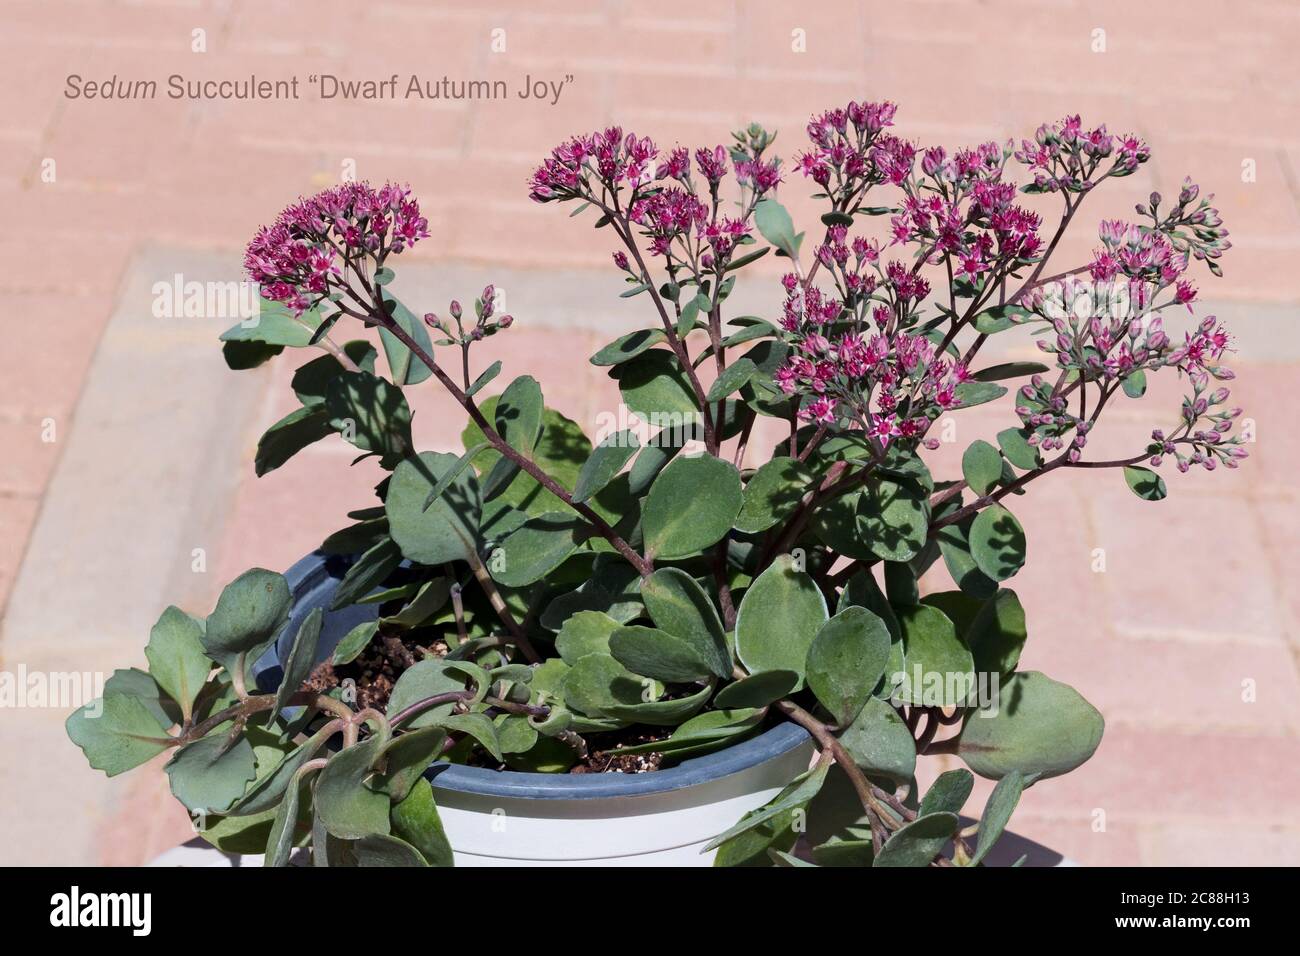 labeled example of a flowering dwarf autumn joy sedum stonecrop growing in a container with a blurred brick patio in the background Stock Photo